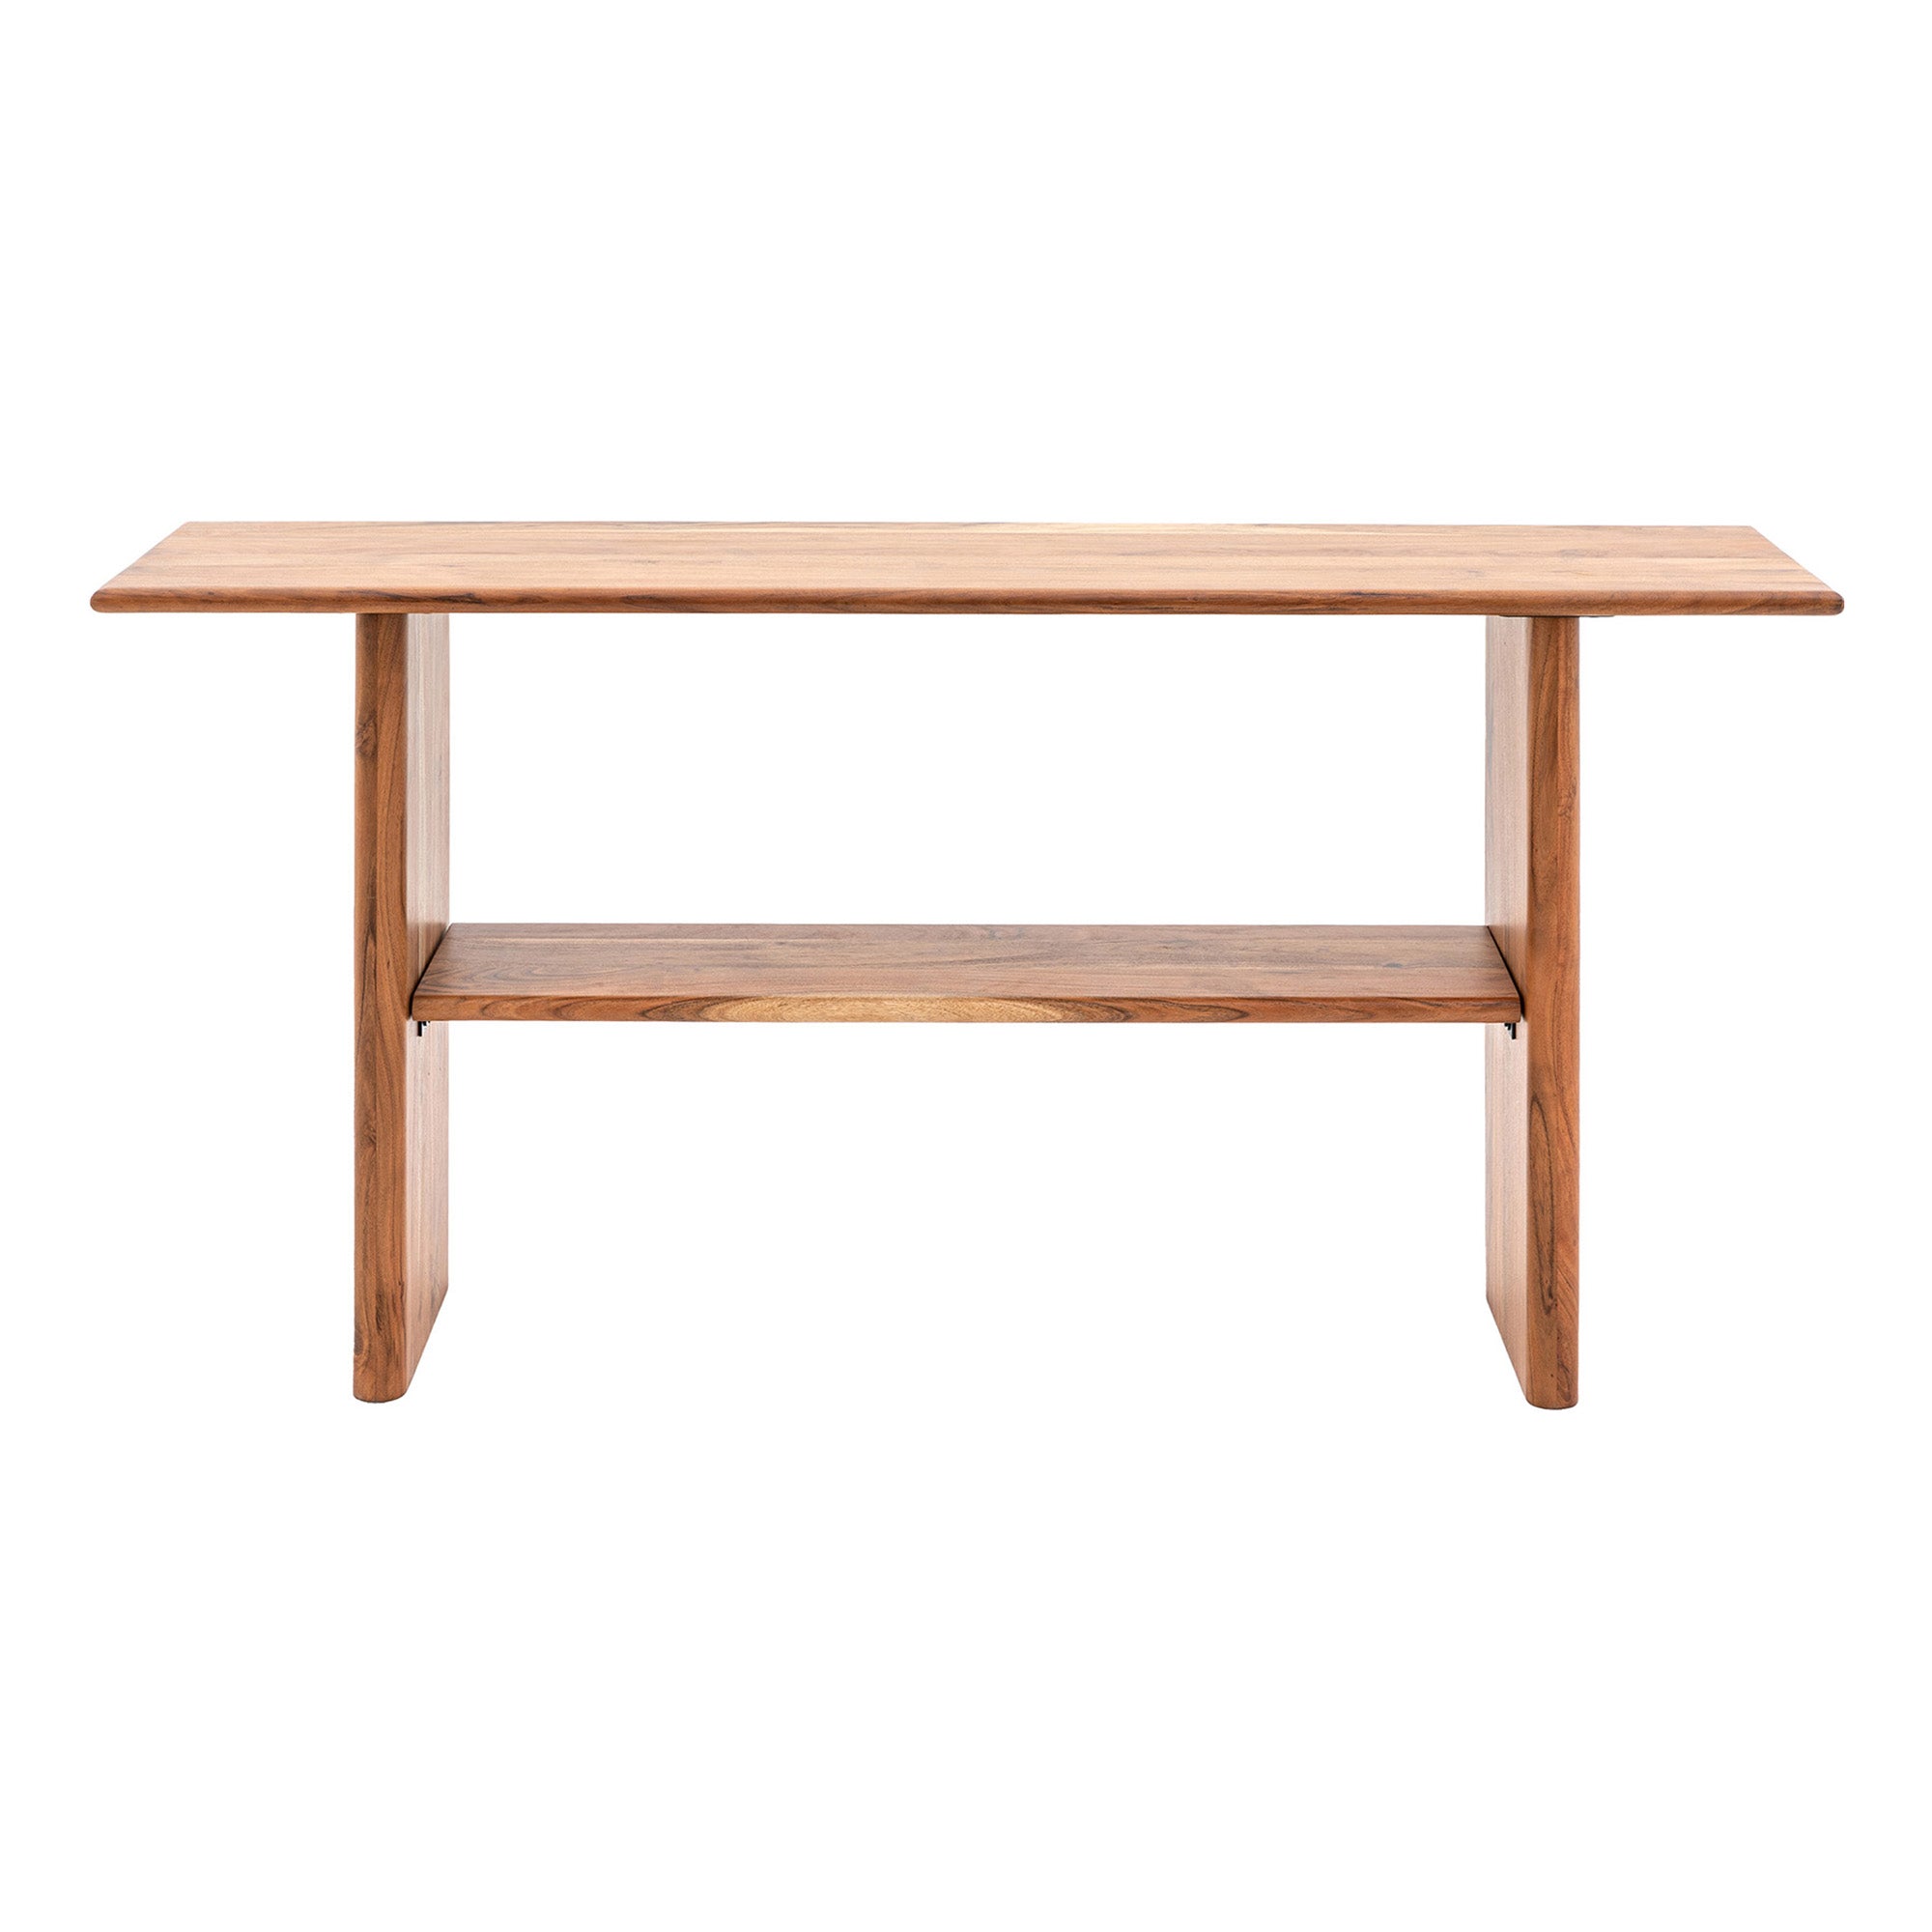 The Contemporary Console Table